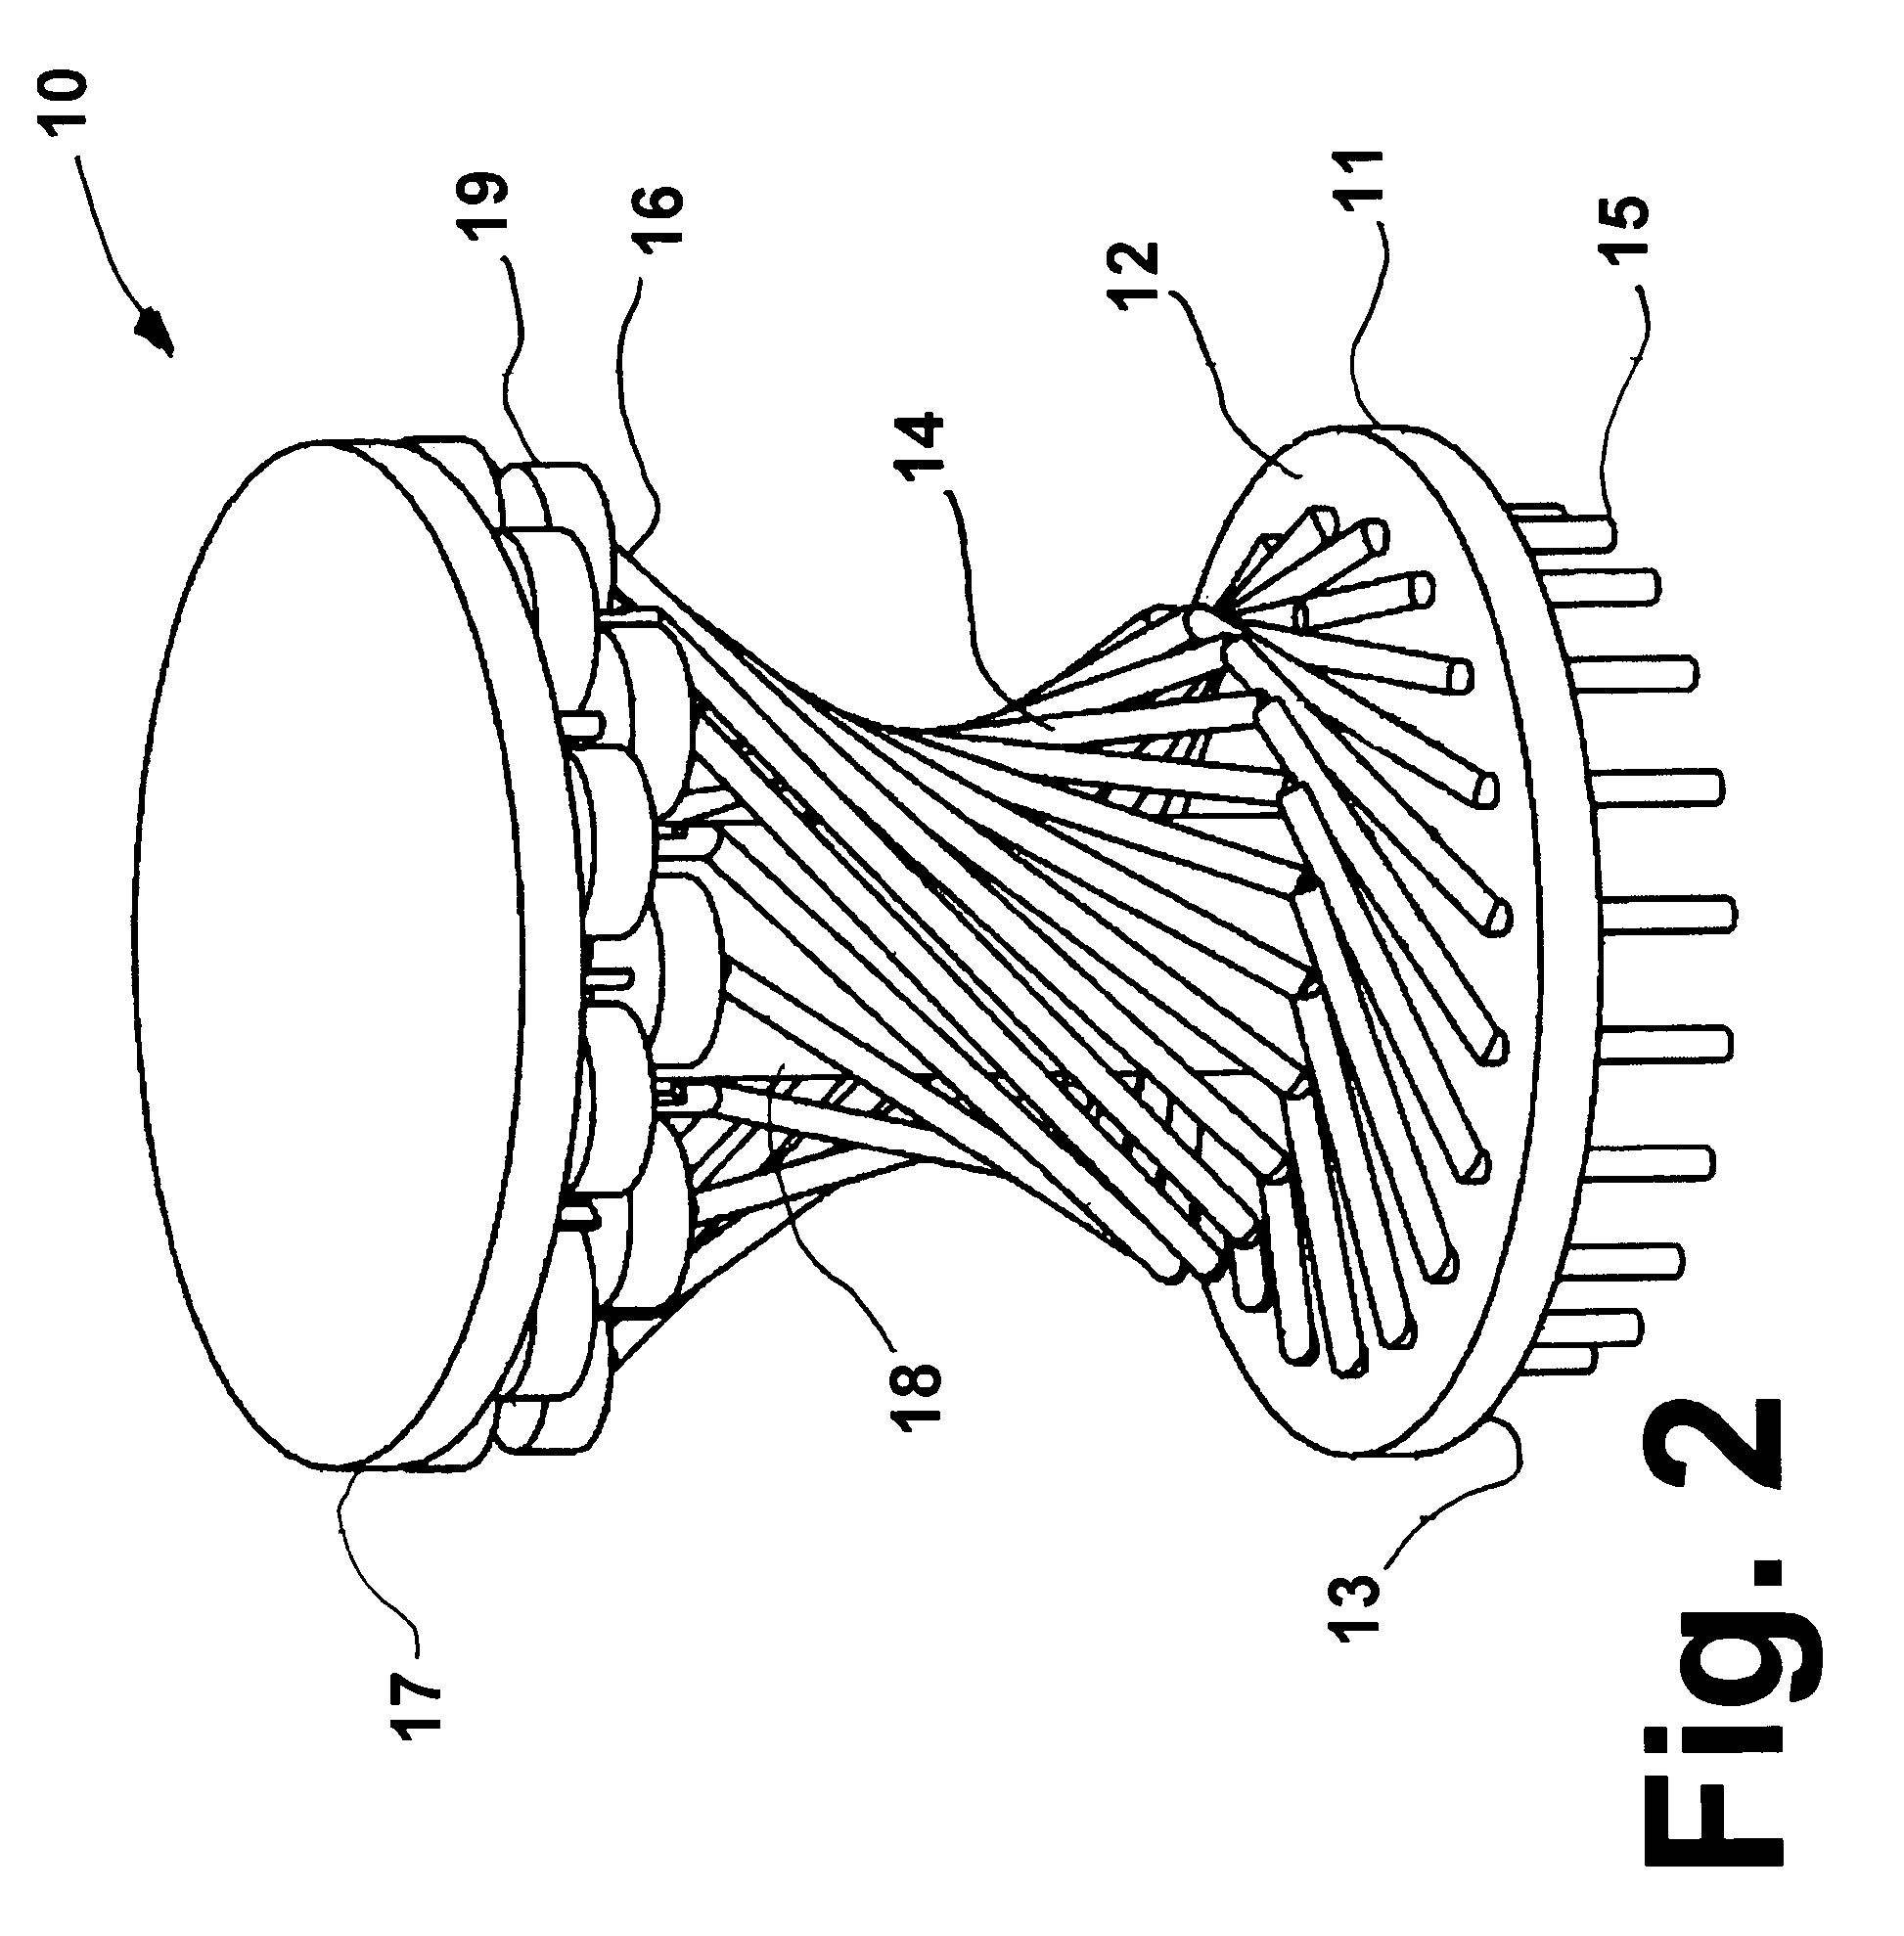 Underground pipe inspection device and method